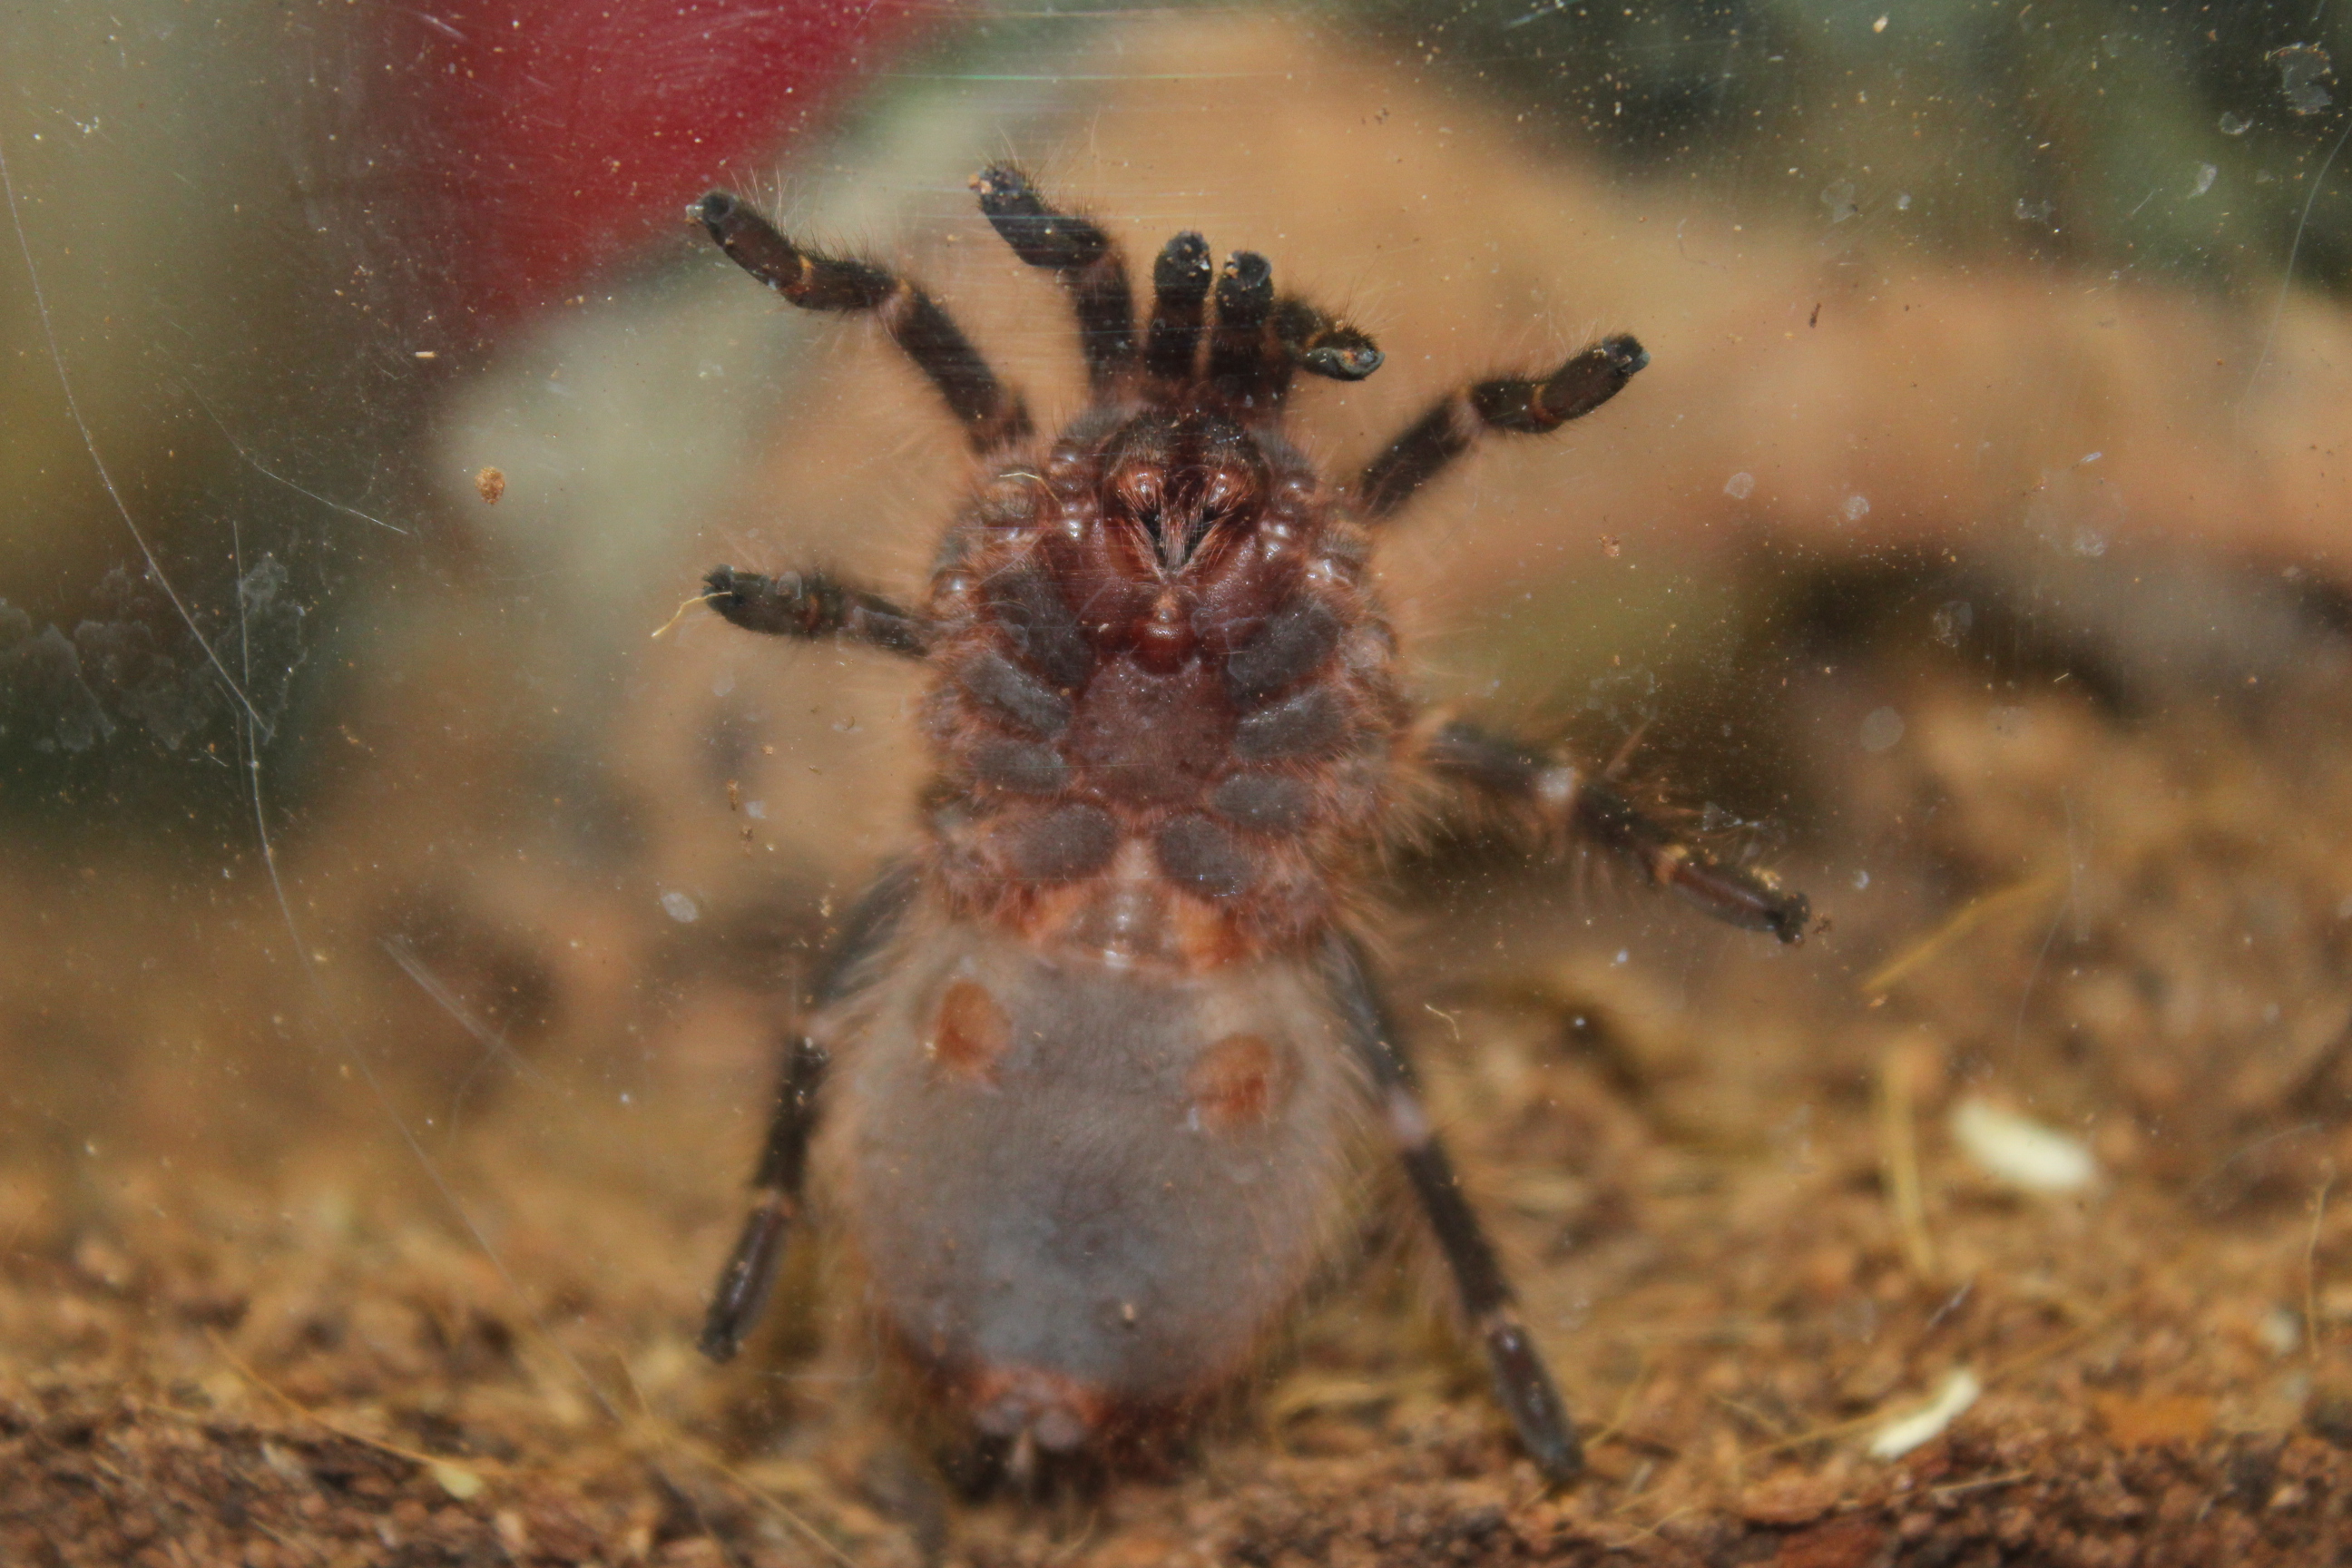 G. pulchripes ventral sexing